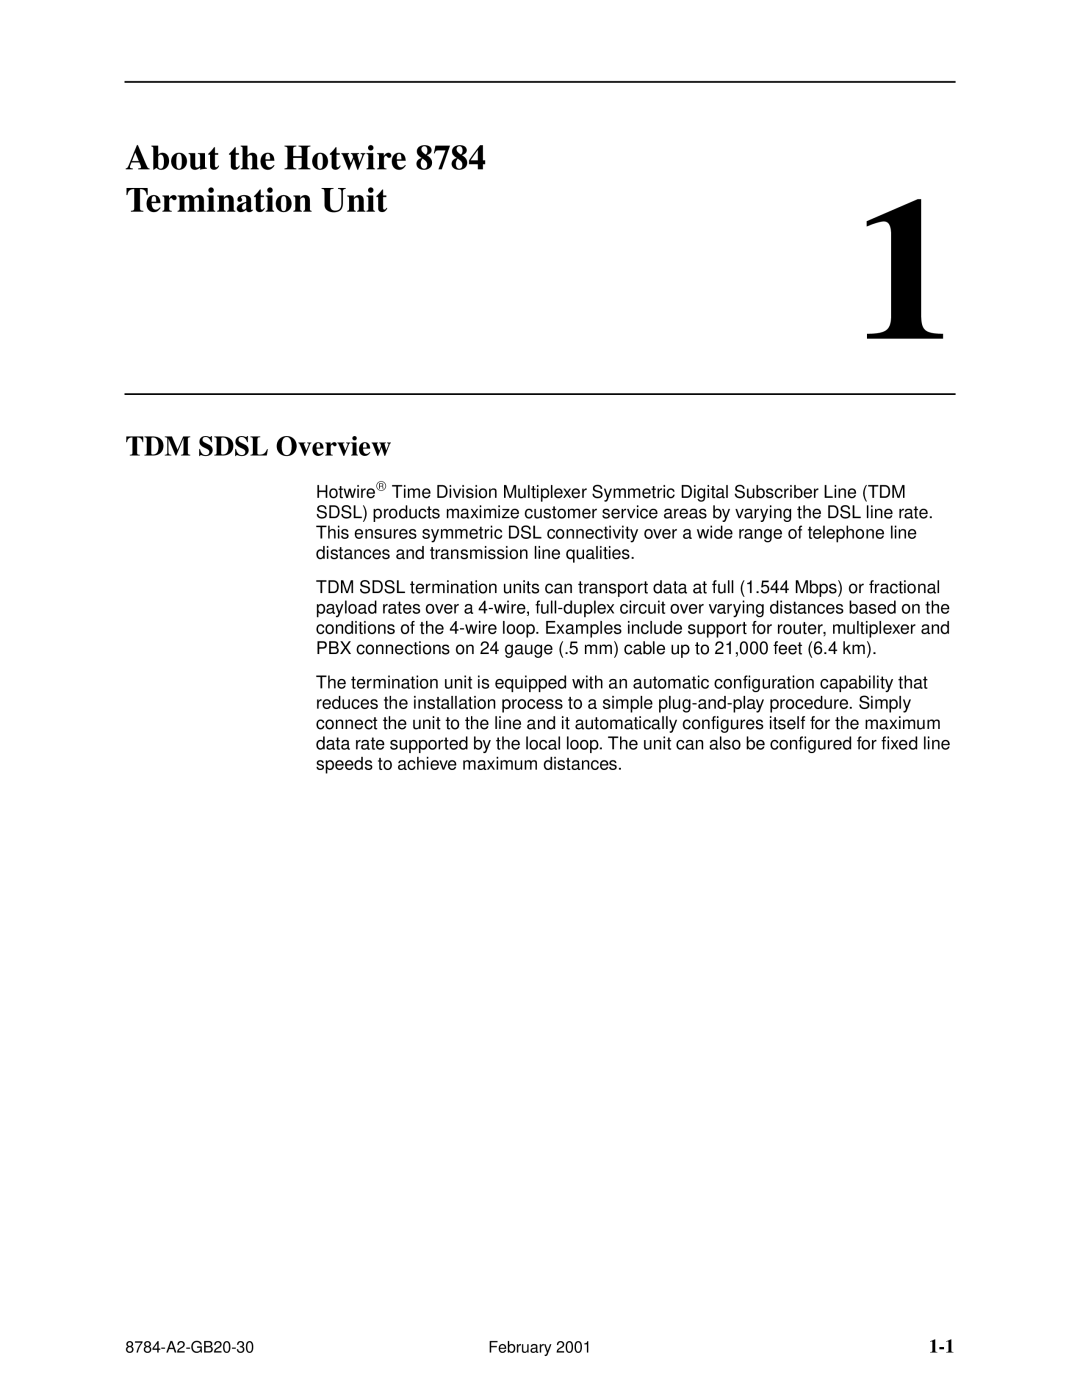 Paradyne 8784 manual About the Hotwire, Termination Unit, TDM SDSL Overview 